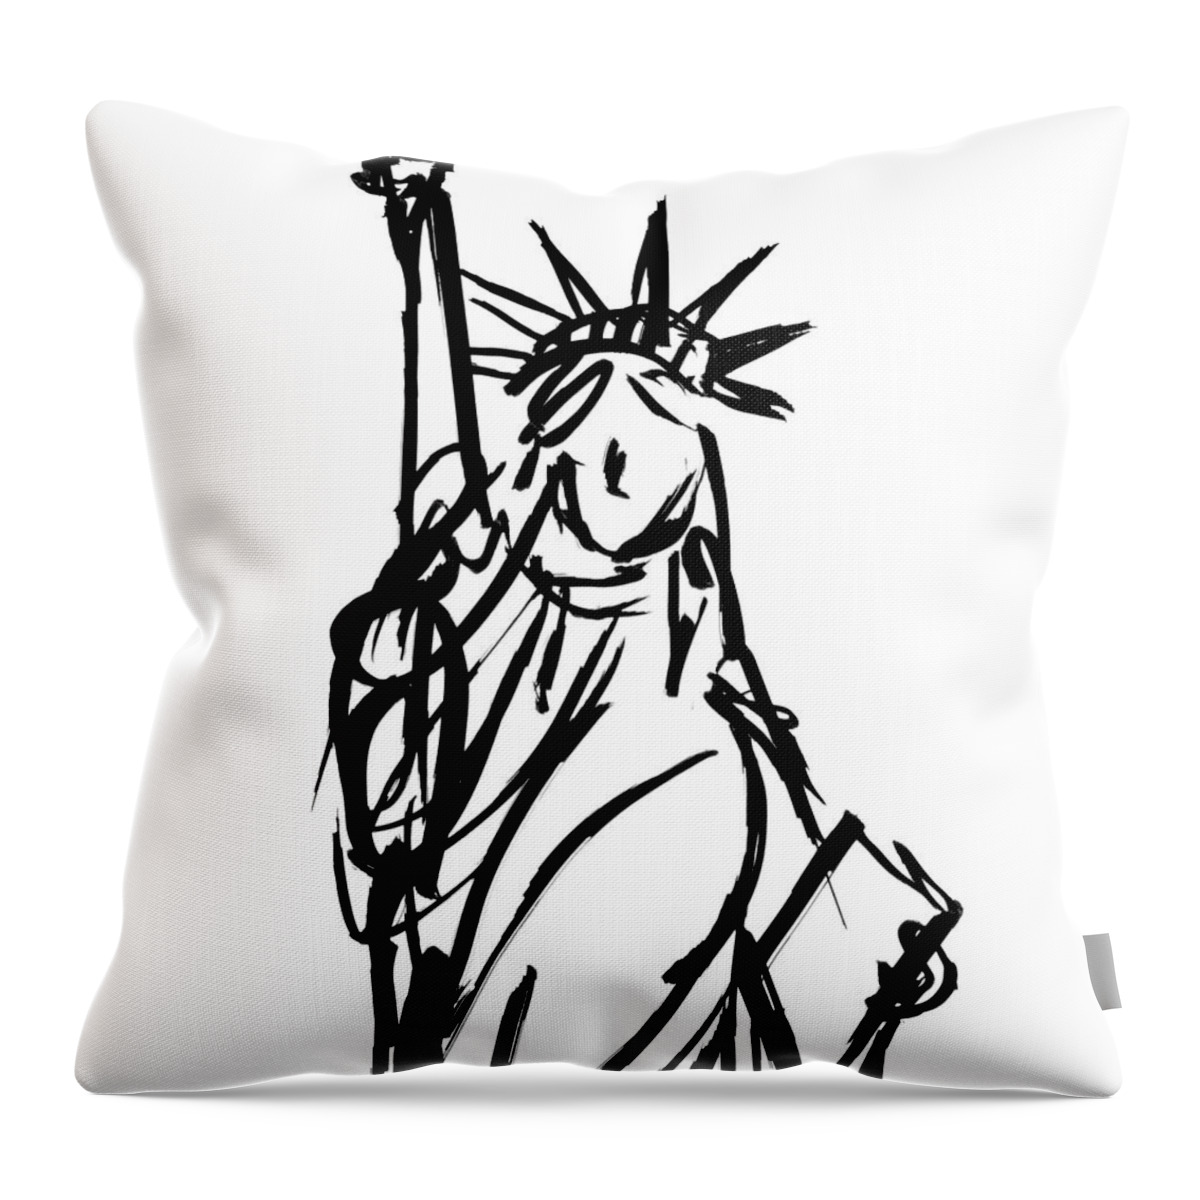 Statue Throw Pillow featuring the digital art Statue Of Liberty by Sd Graphics Studio